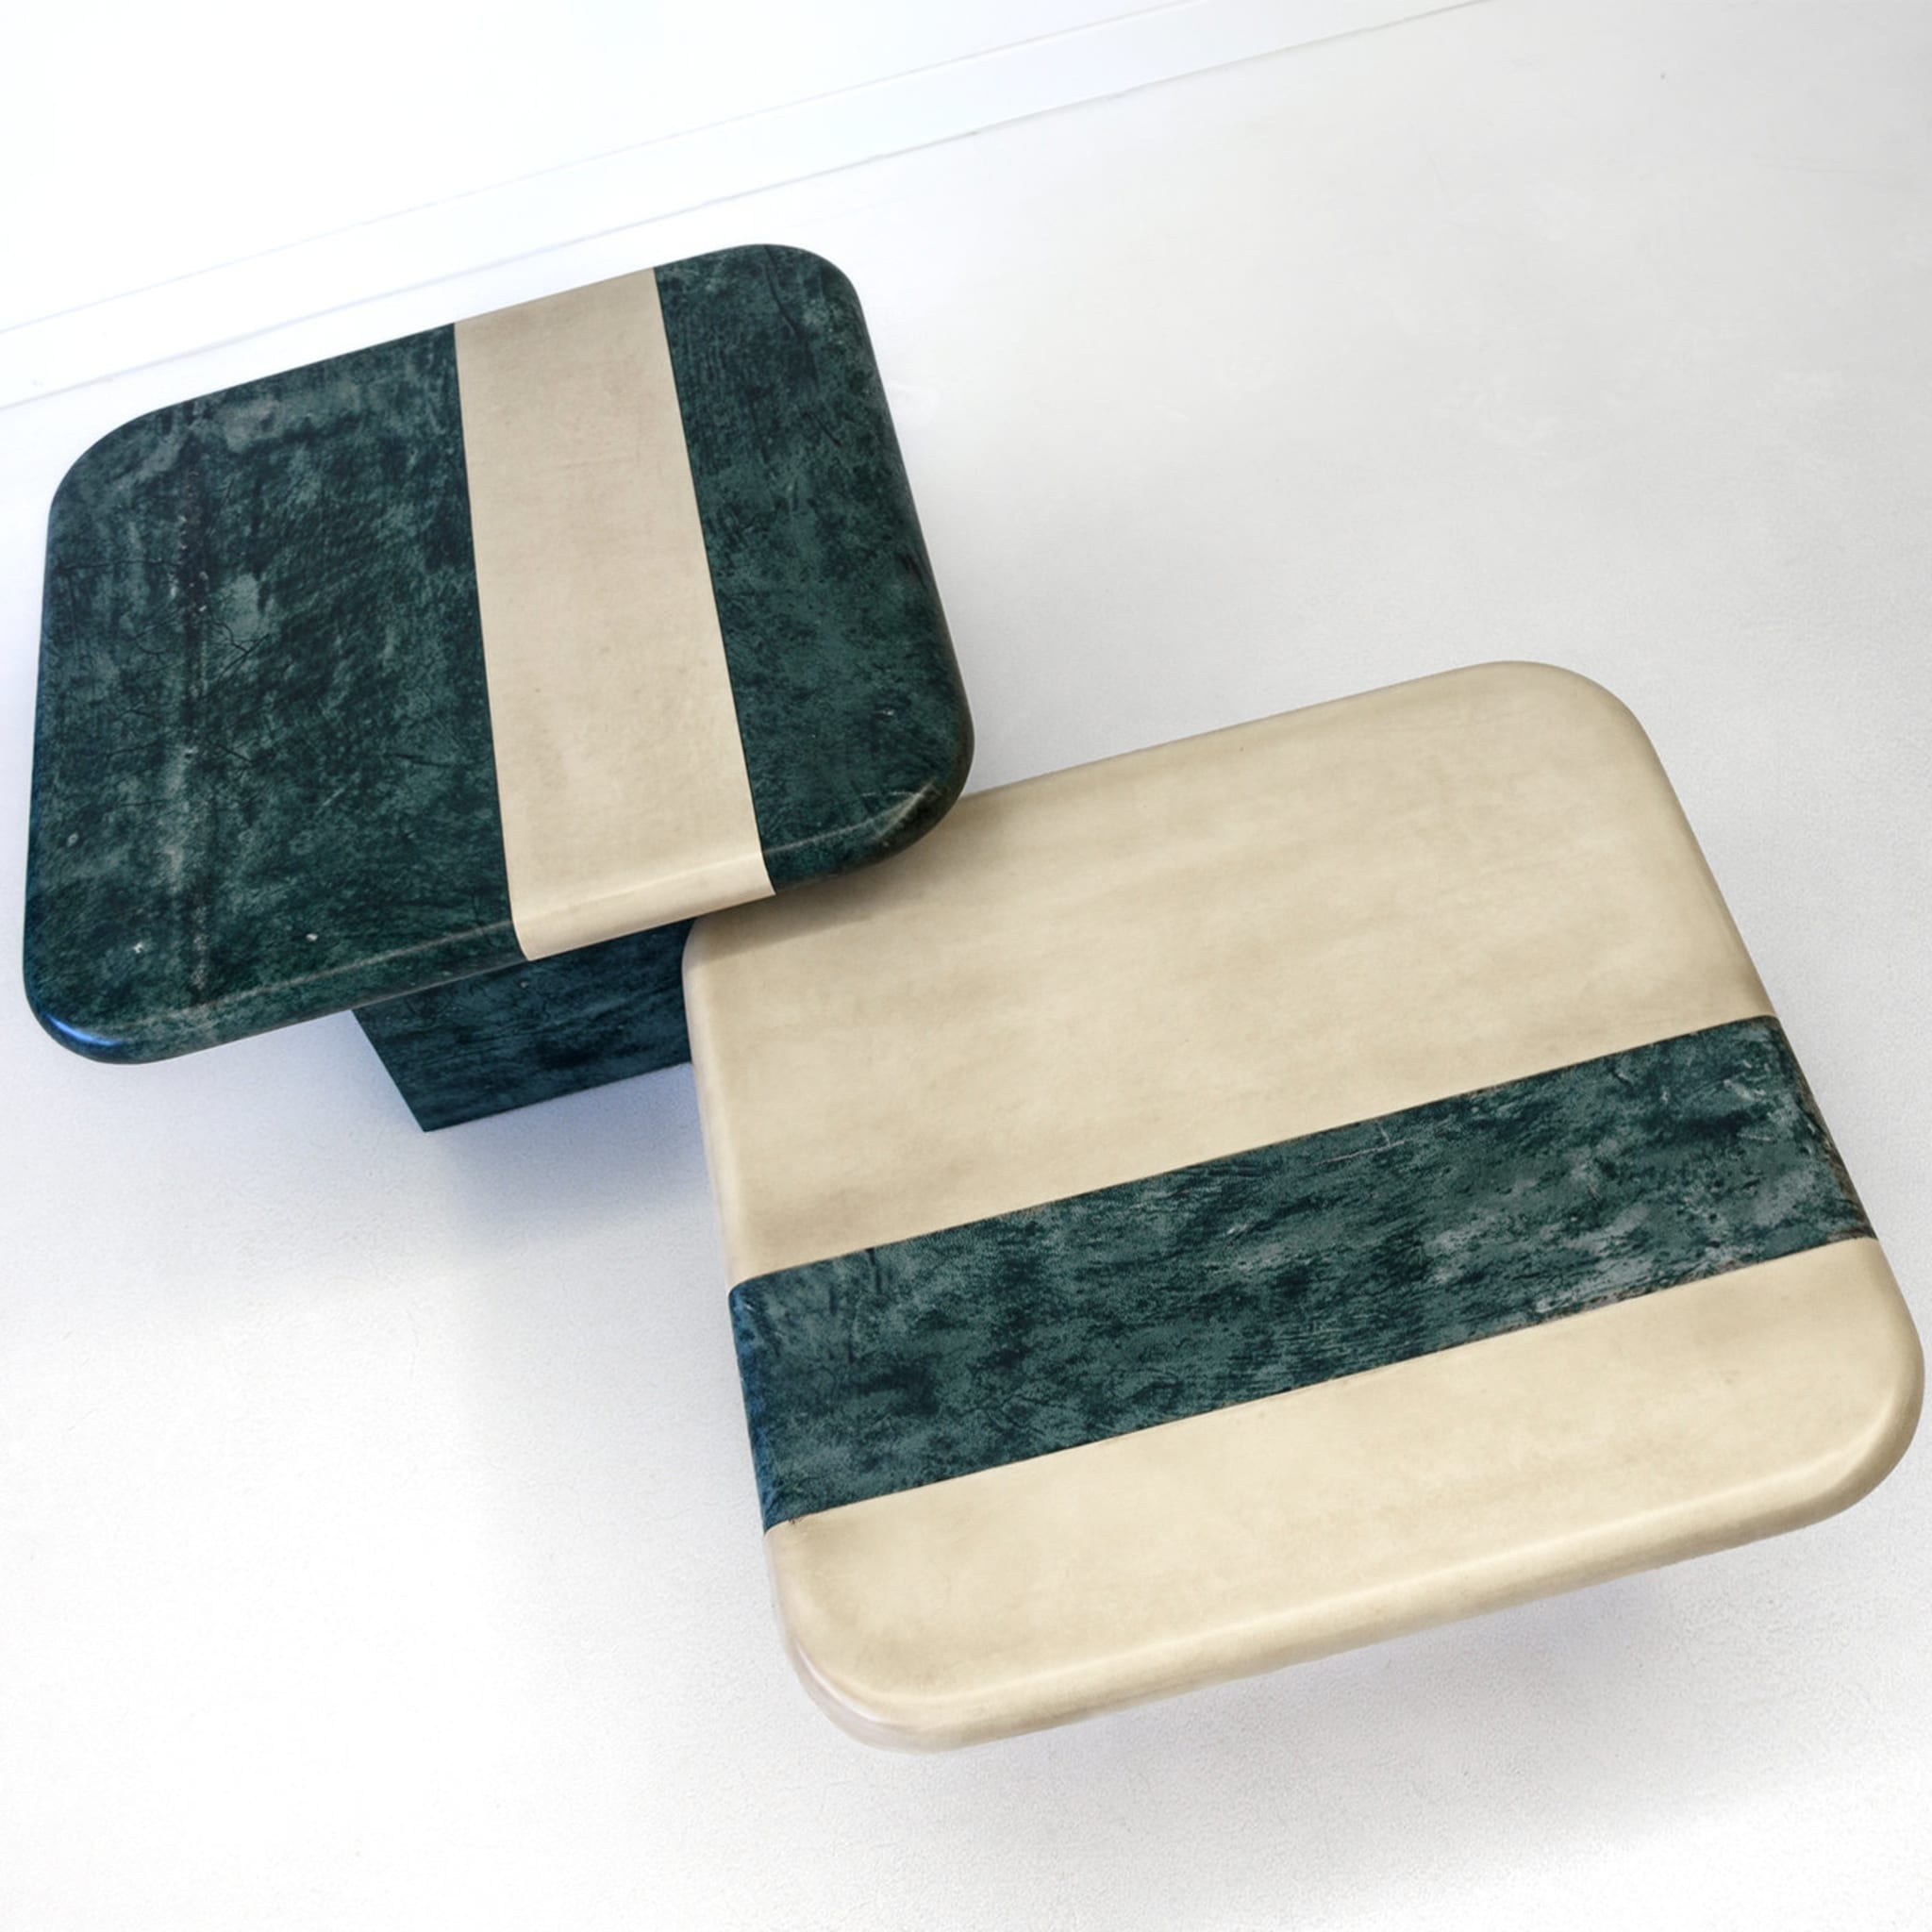 Set of 2 Green and Sand Nesting Tables  - Alternative view 4